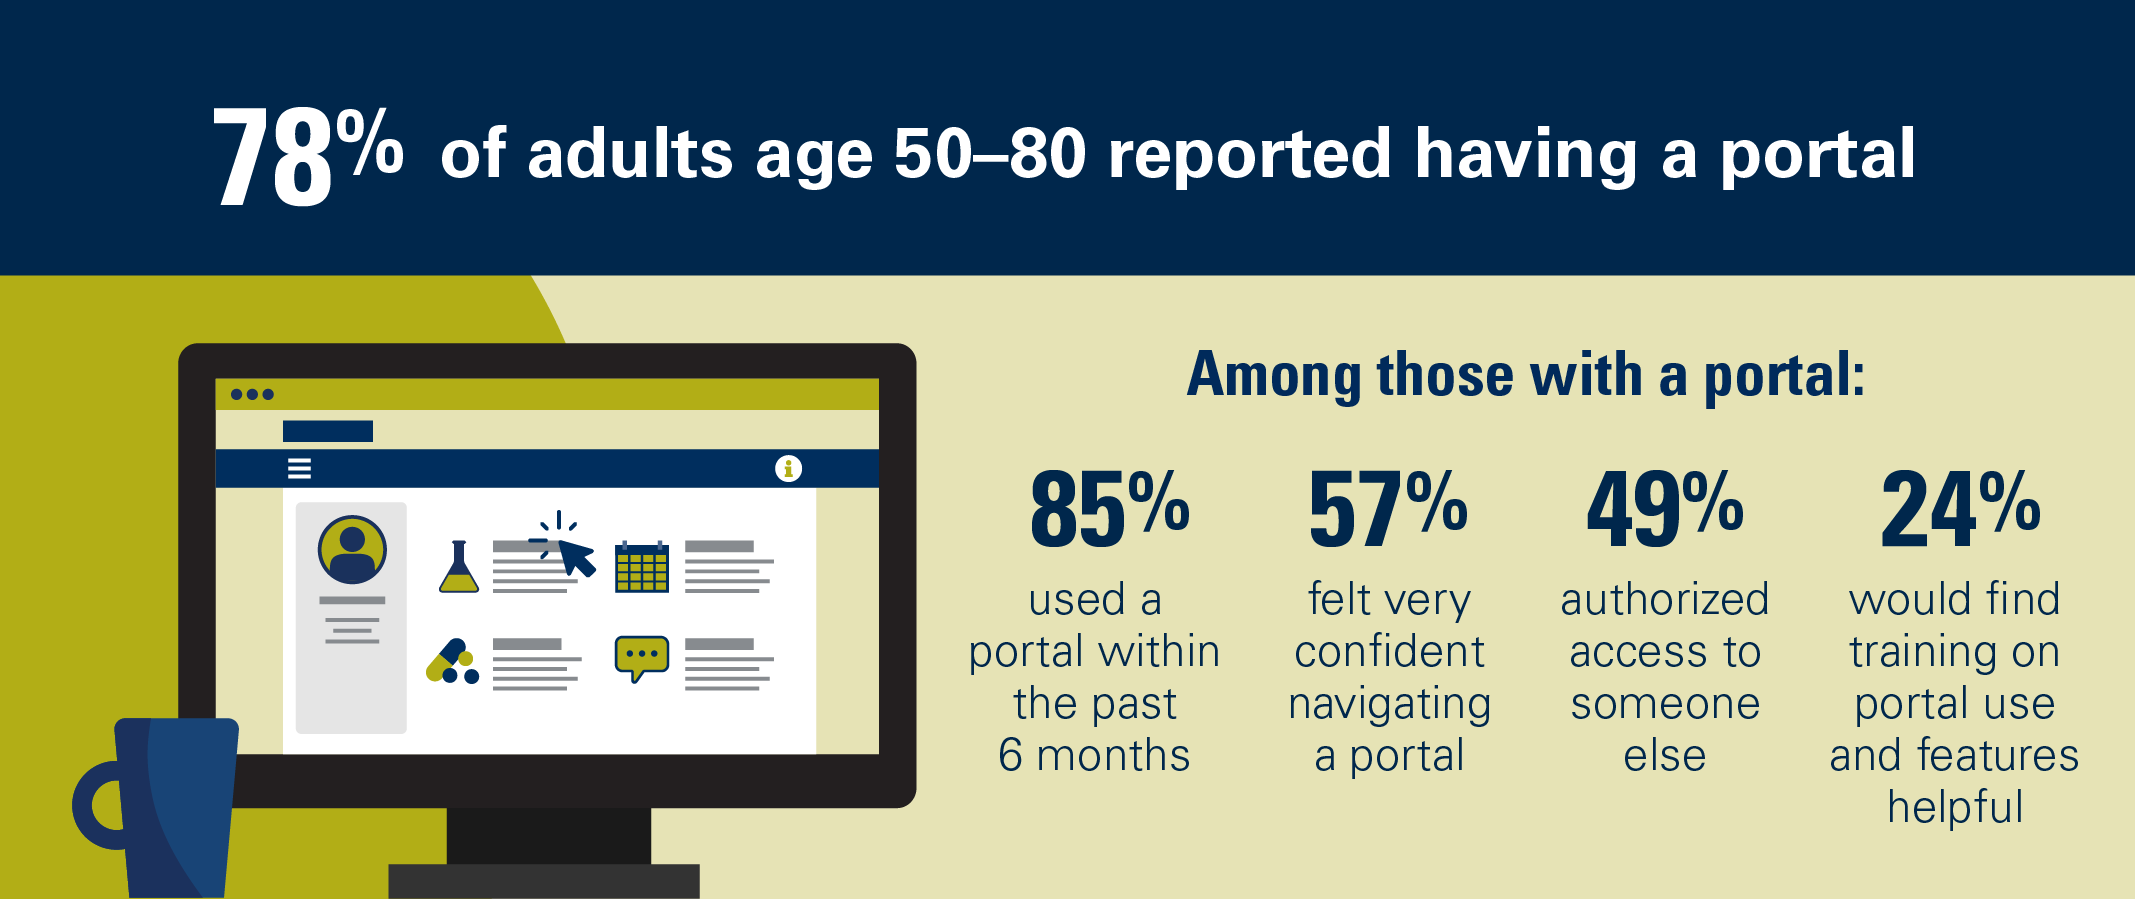 78% of adults age 50-80 reported having a portal